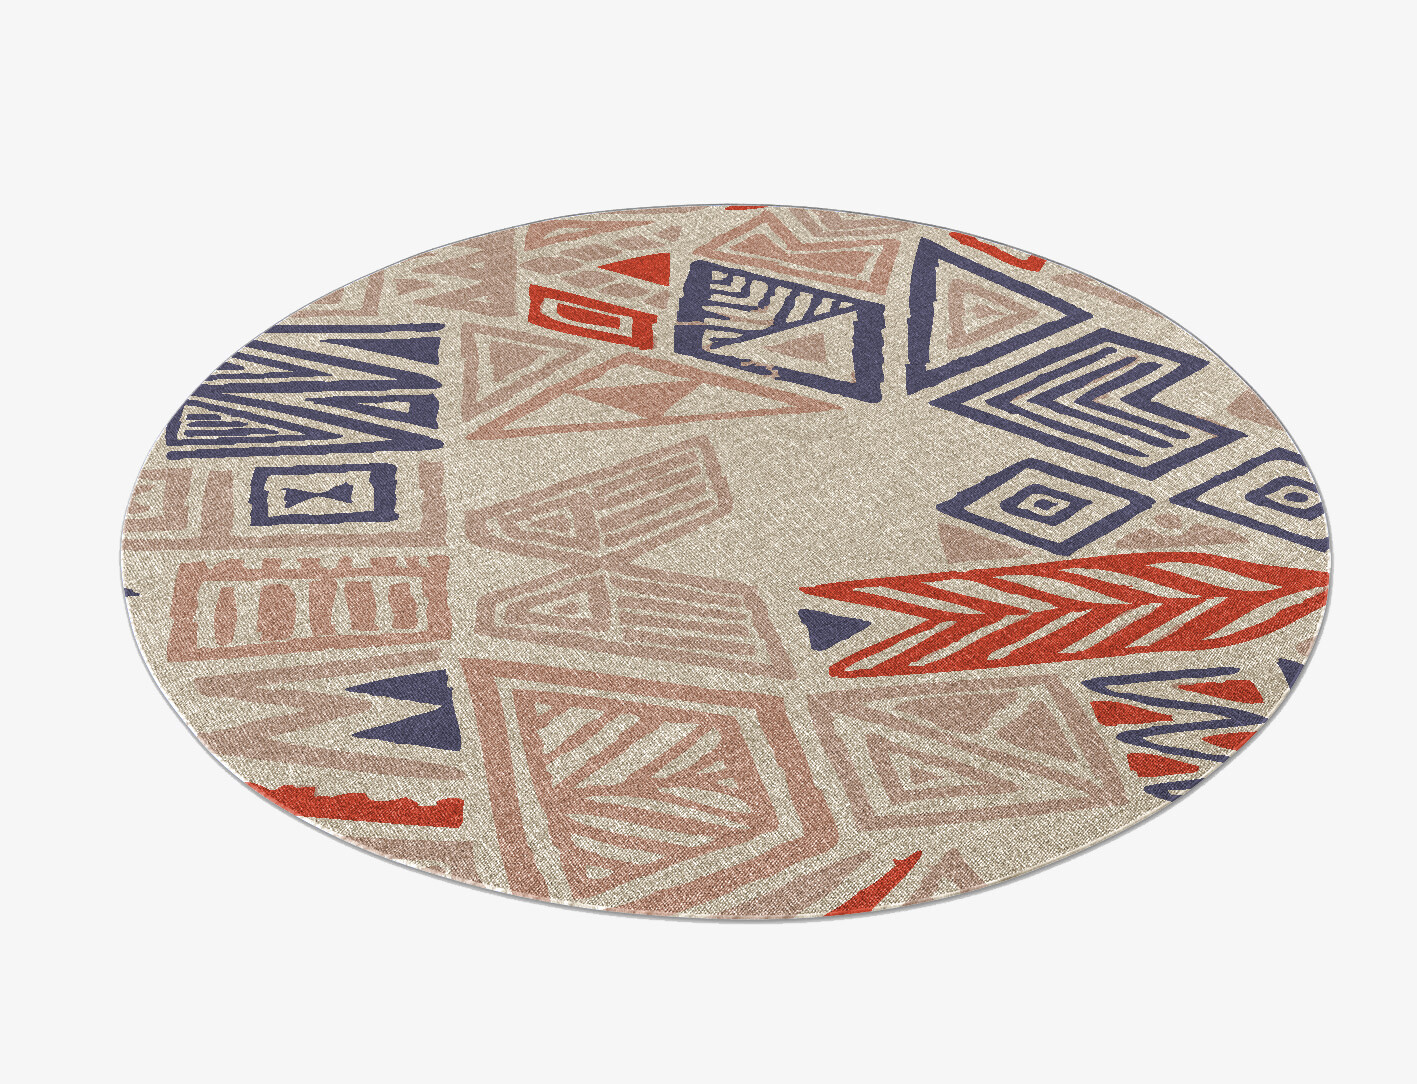 Azteque Abstract Round Outdoor Recycled Yarn Custom Rug by Rug Artisan